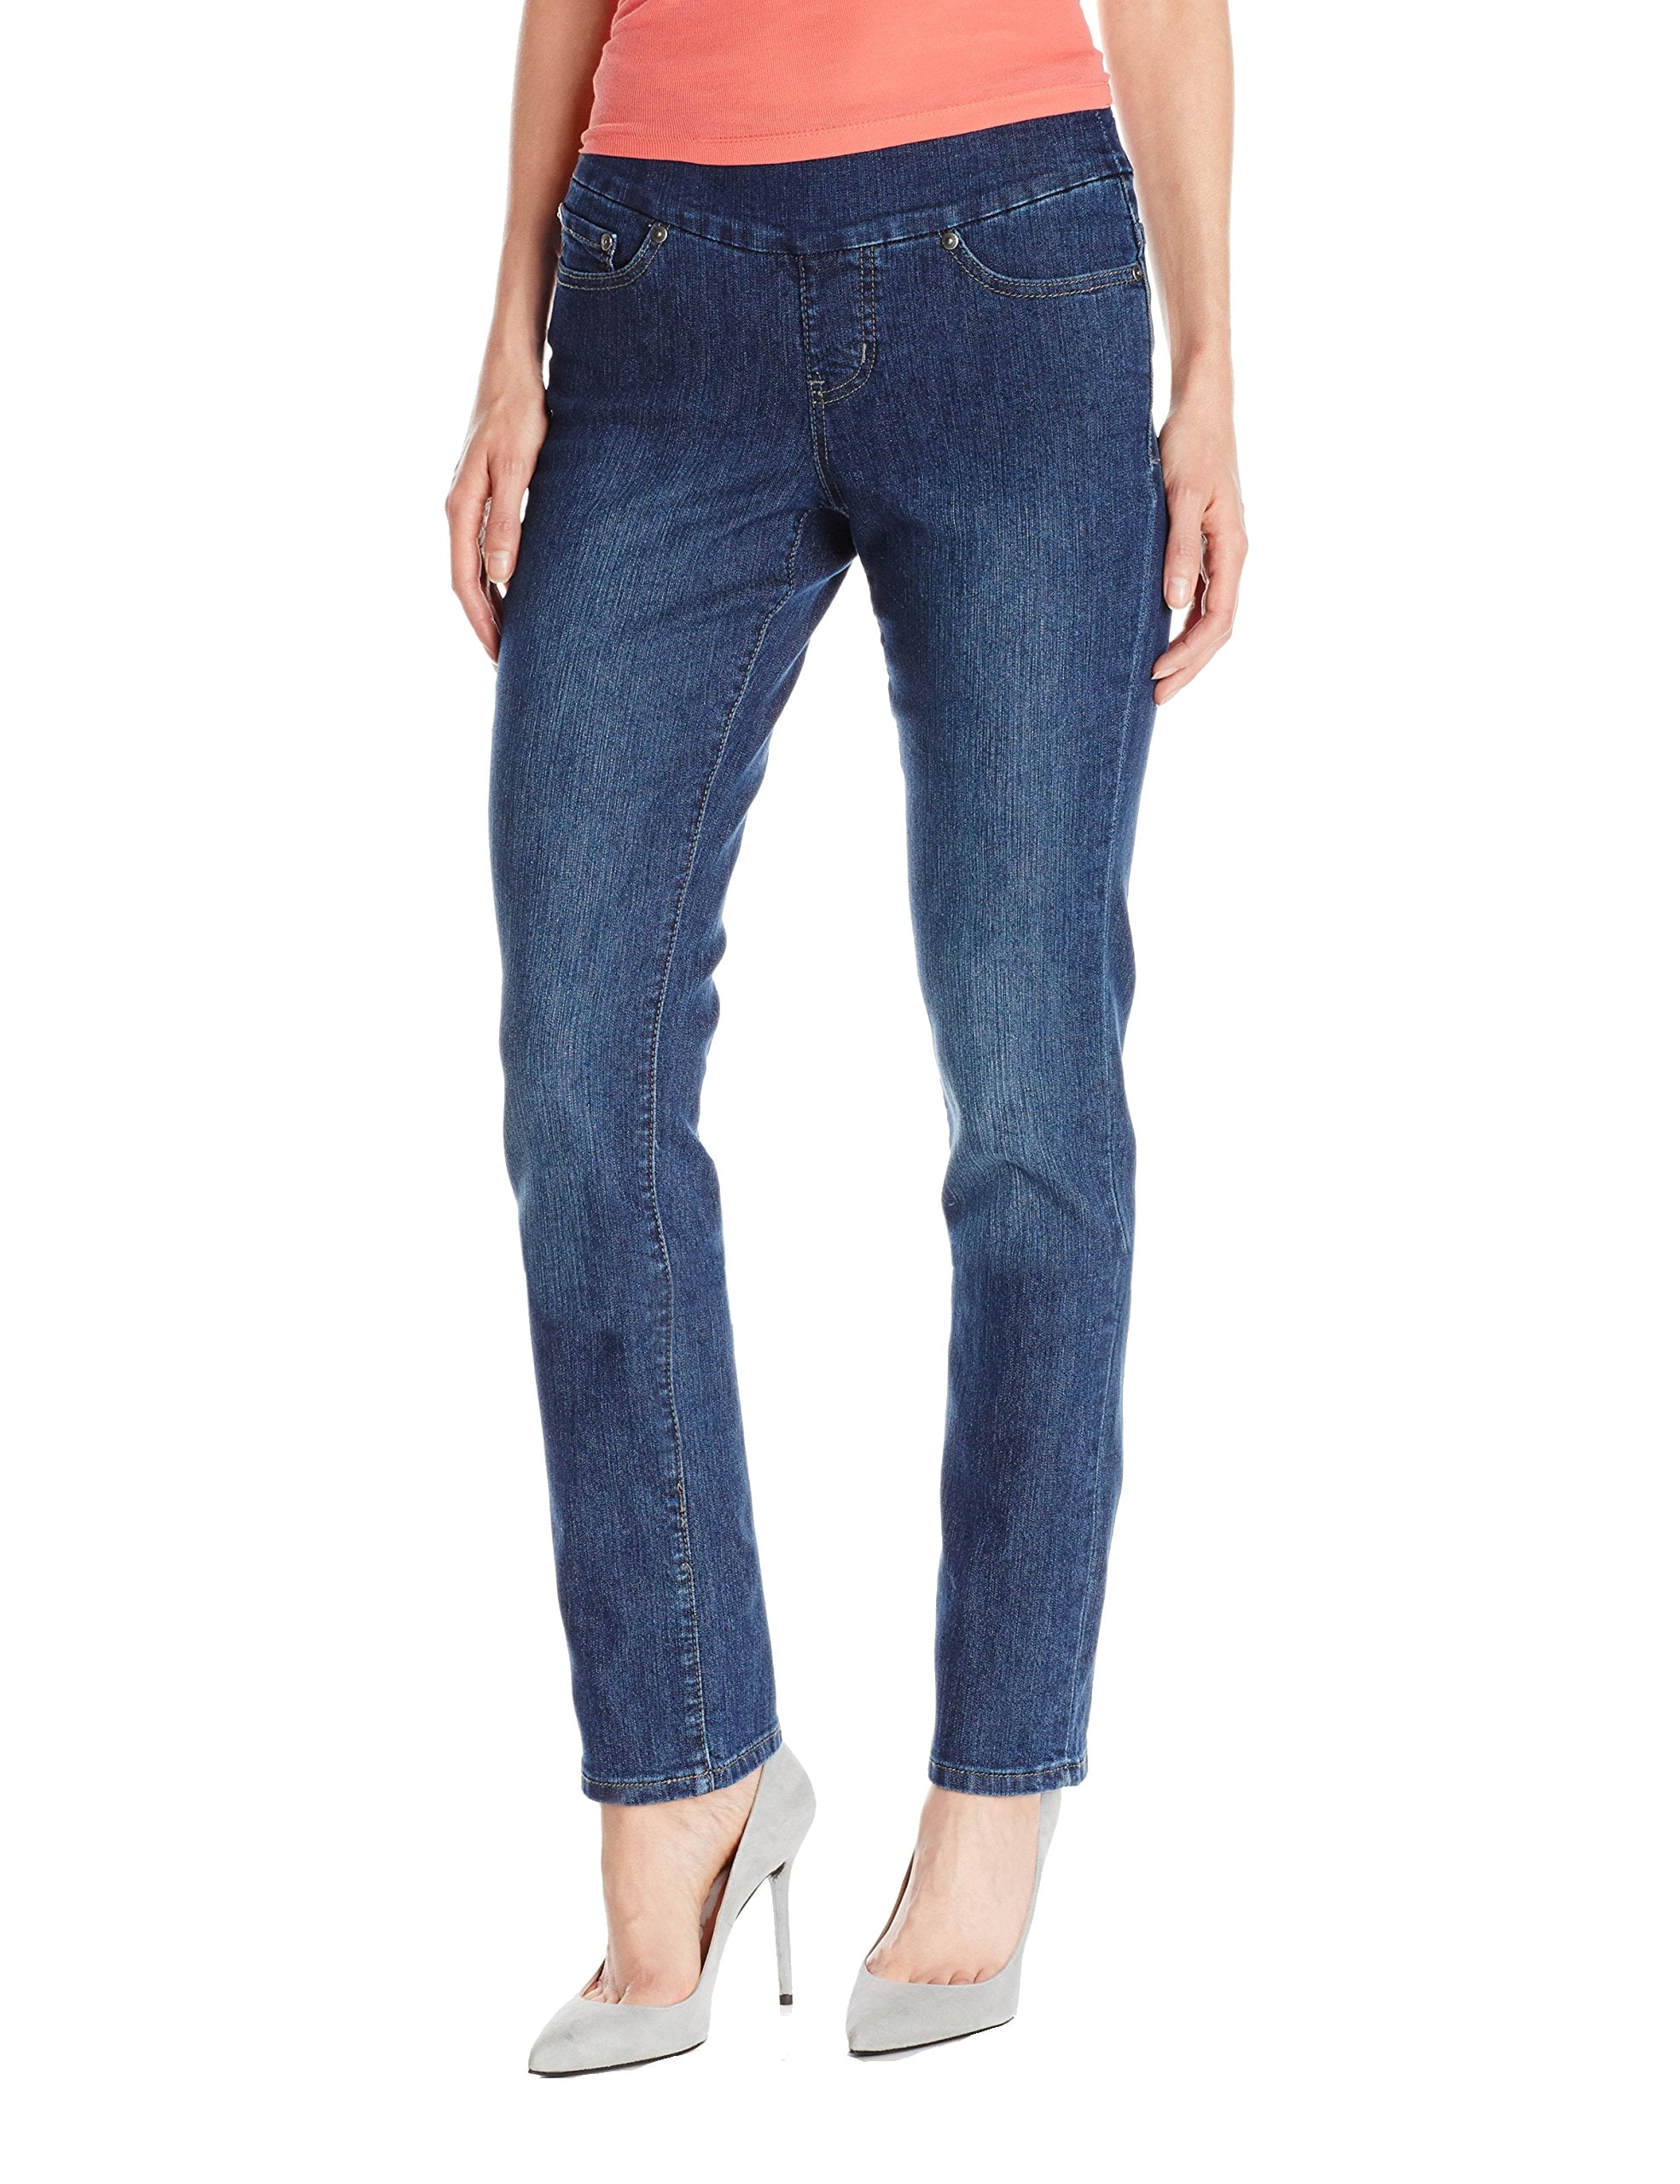 JAG Jeans - JAG NEW Anchor Blue Womens Size 12S Stretch Pull-On ...